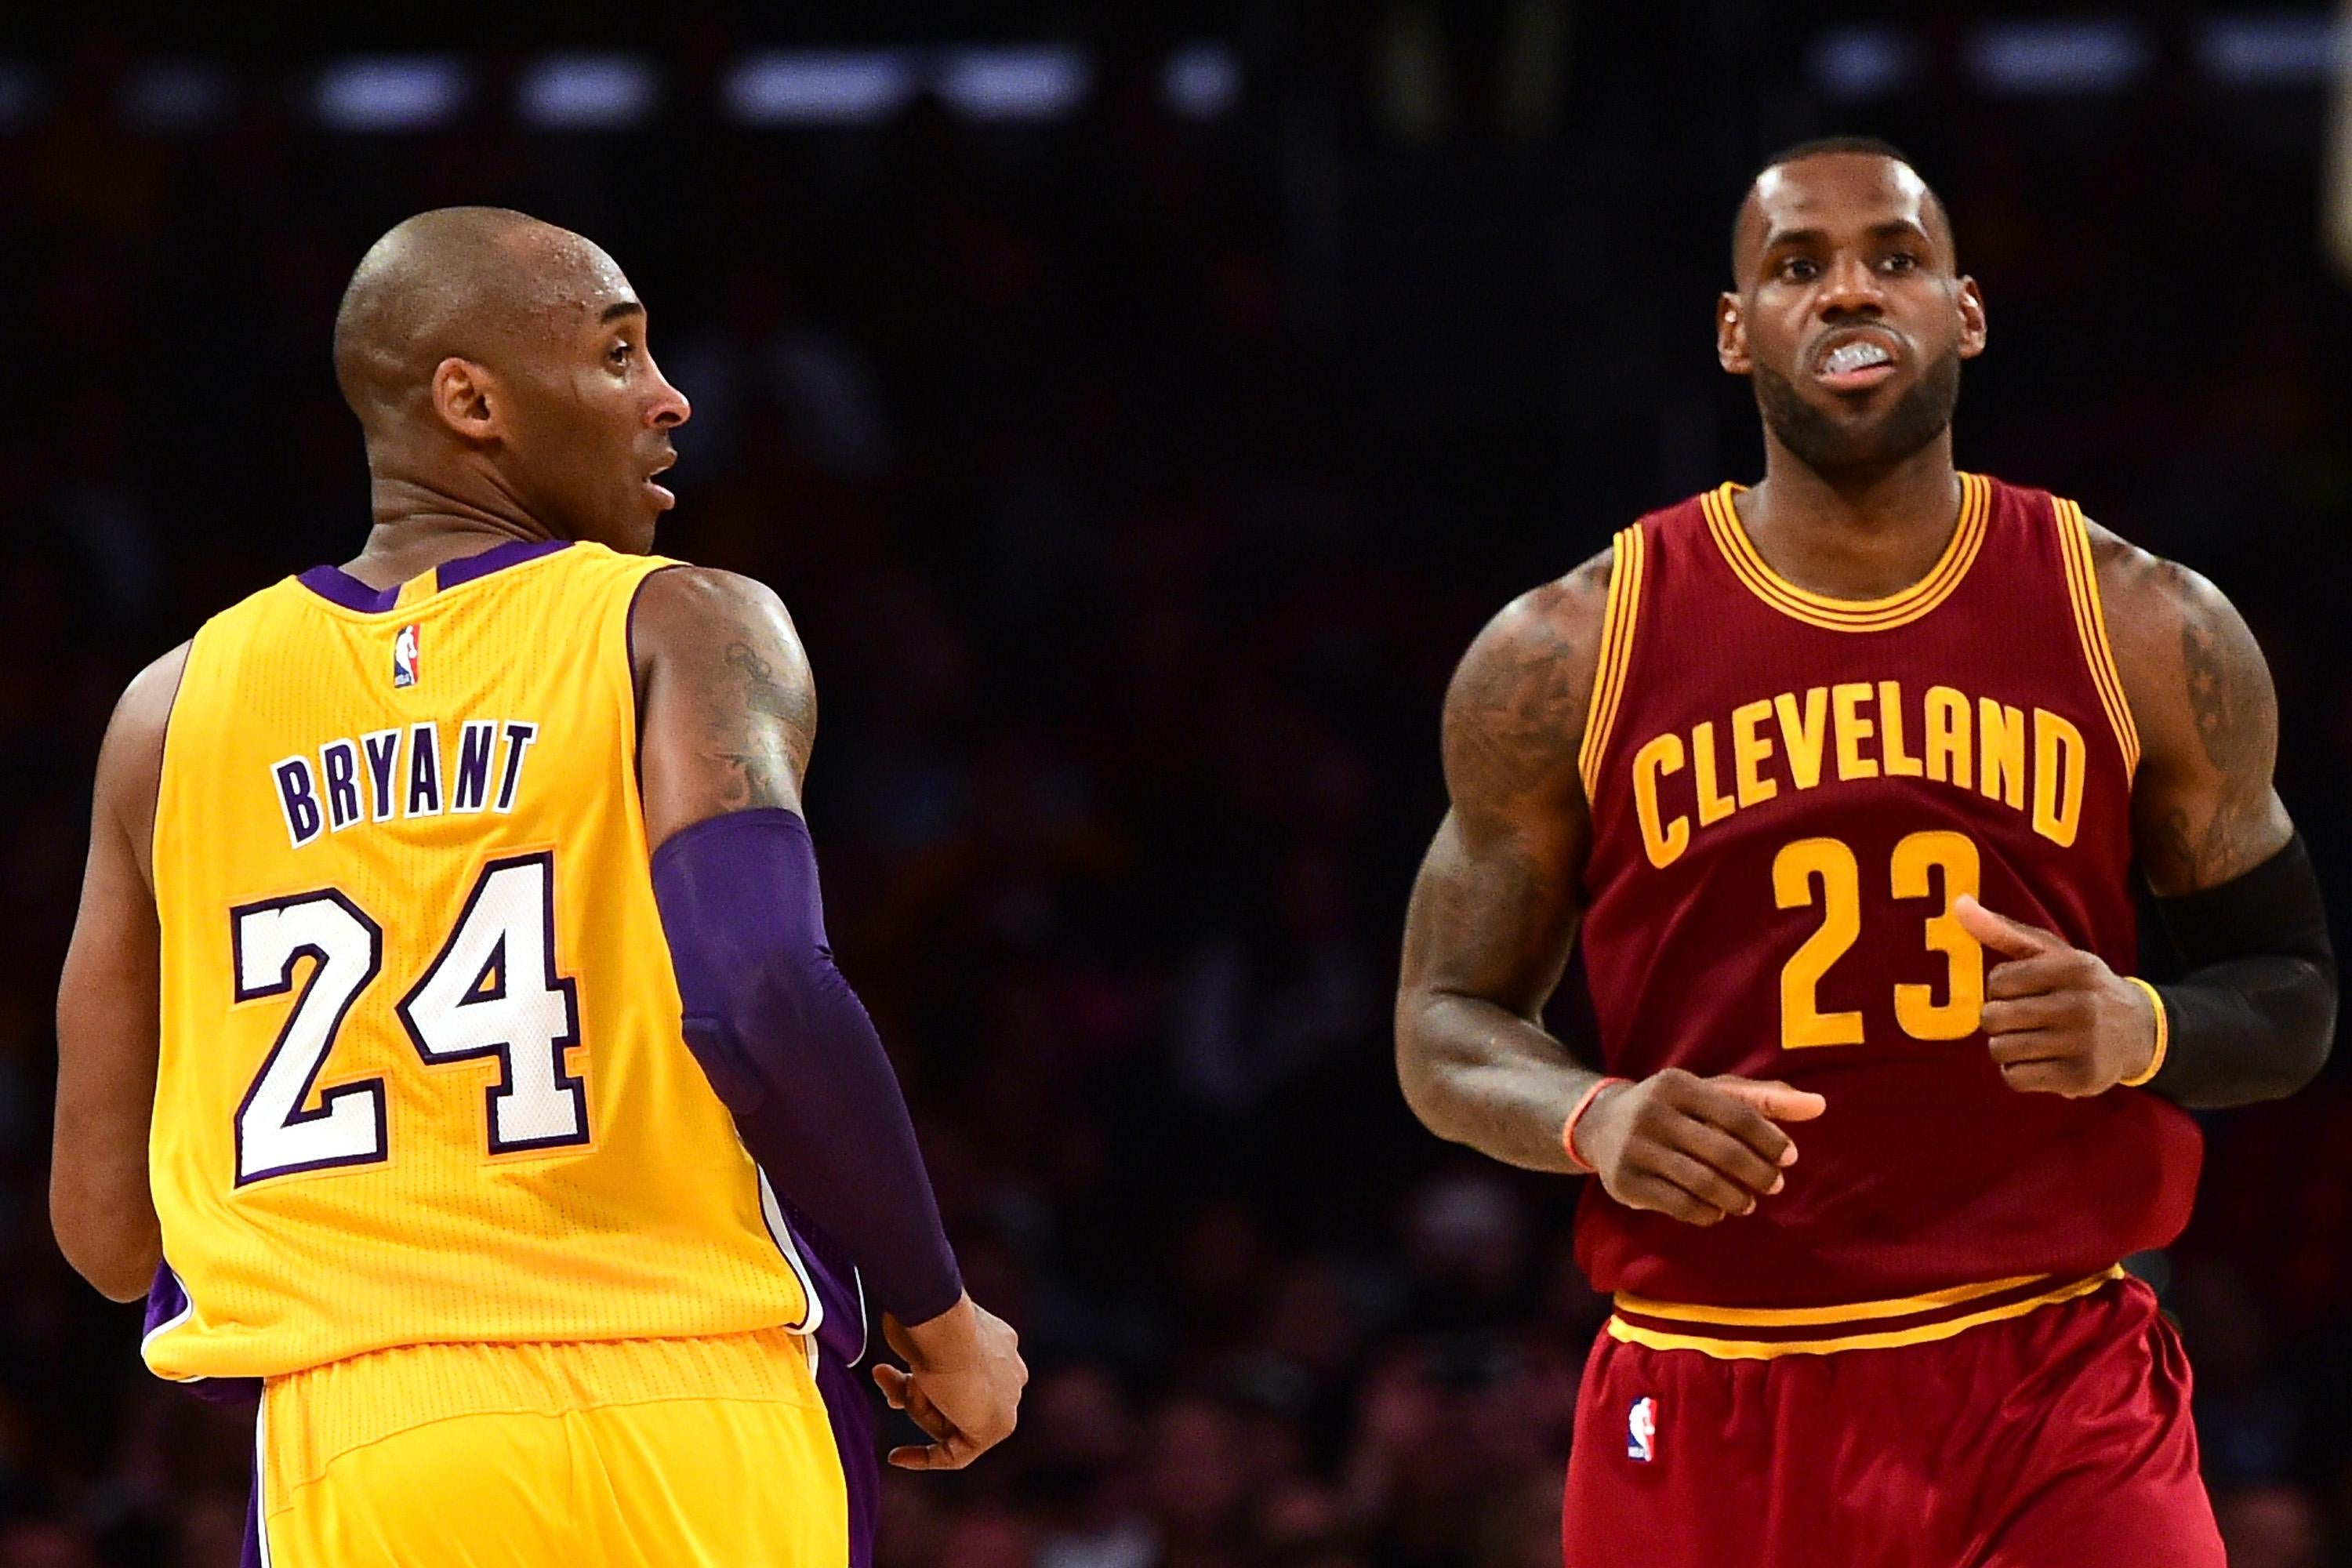 LeBron James Lakers: The three-time NBA champion signs a four-year